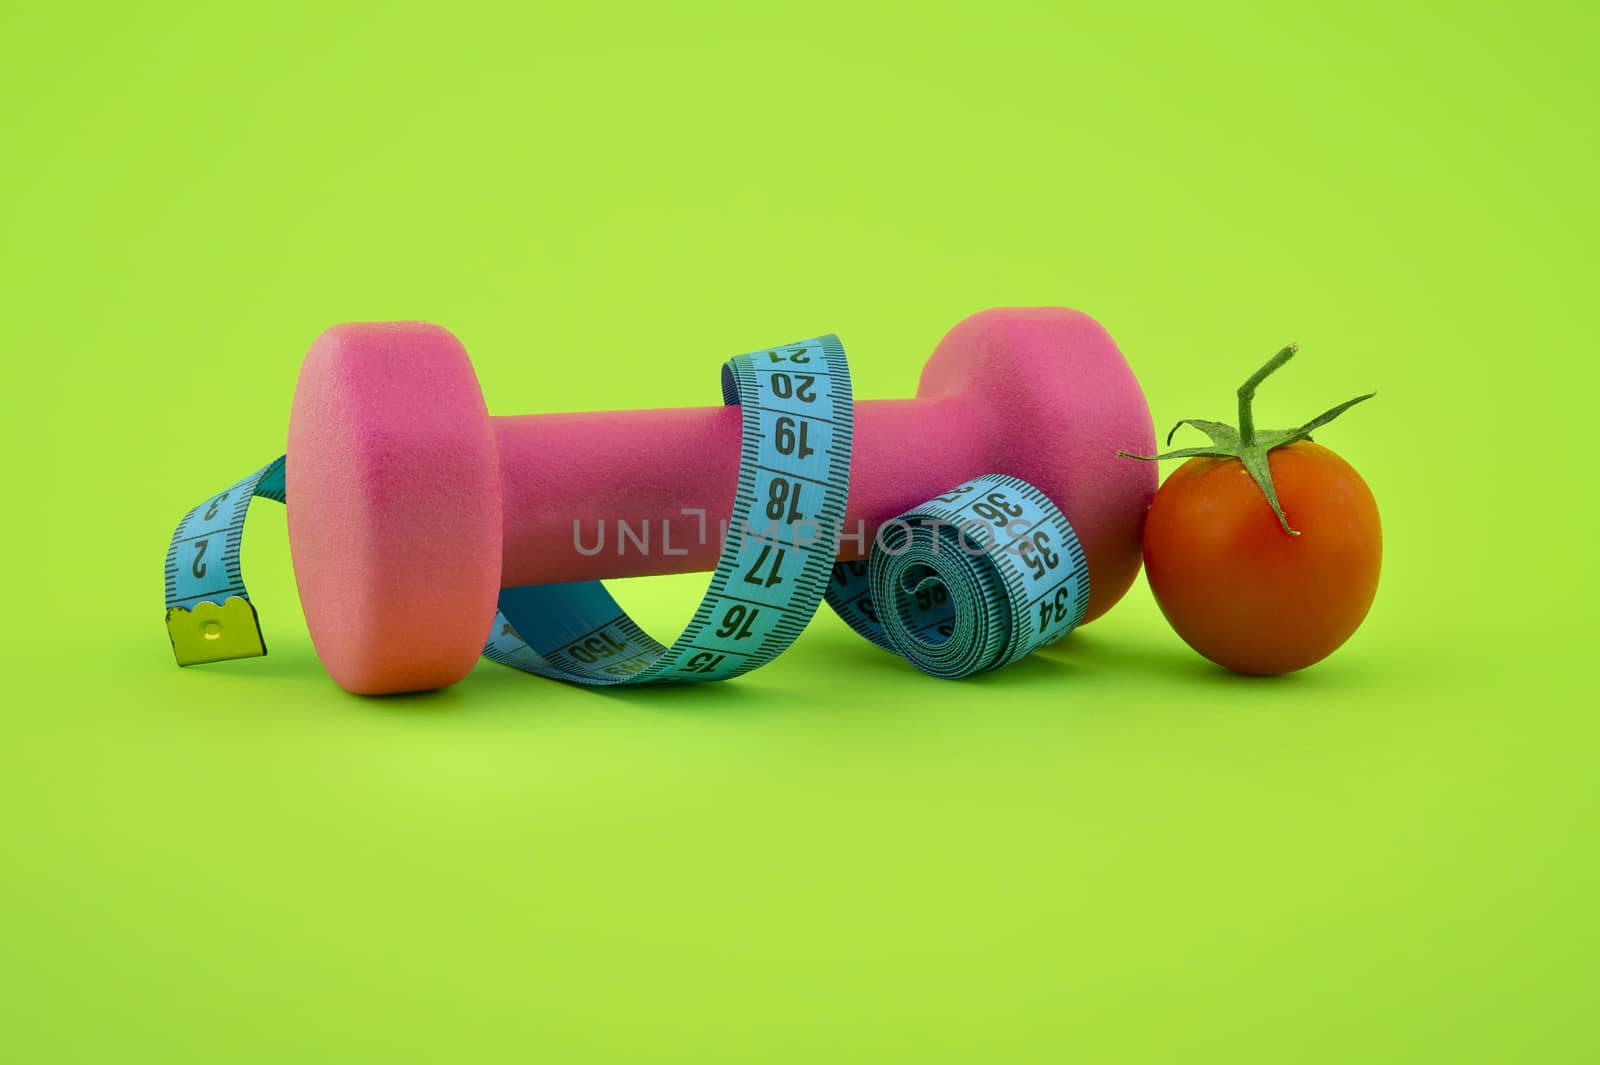 Still life with small dumbbells, measuring tape and cherry tomato, as a concept of healthy nutrition and sports diet in close-up on green background